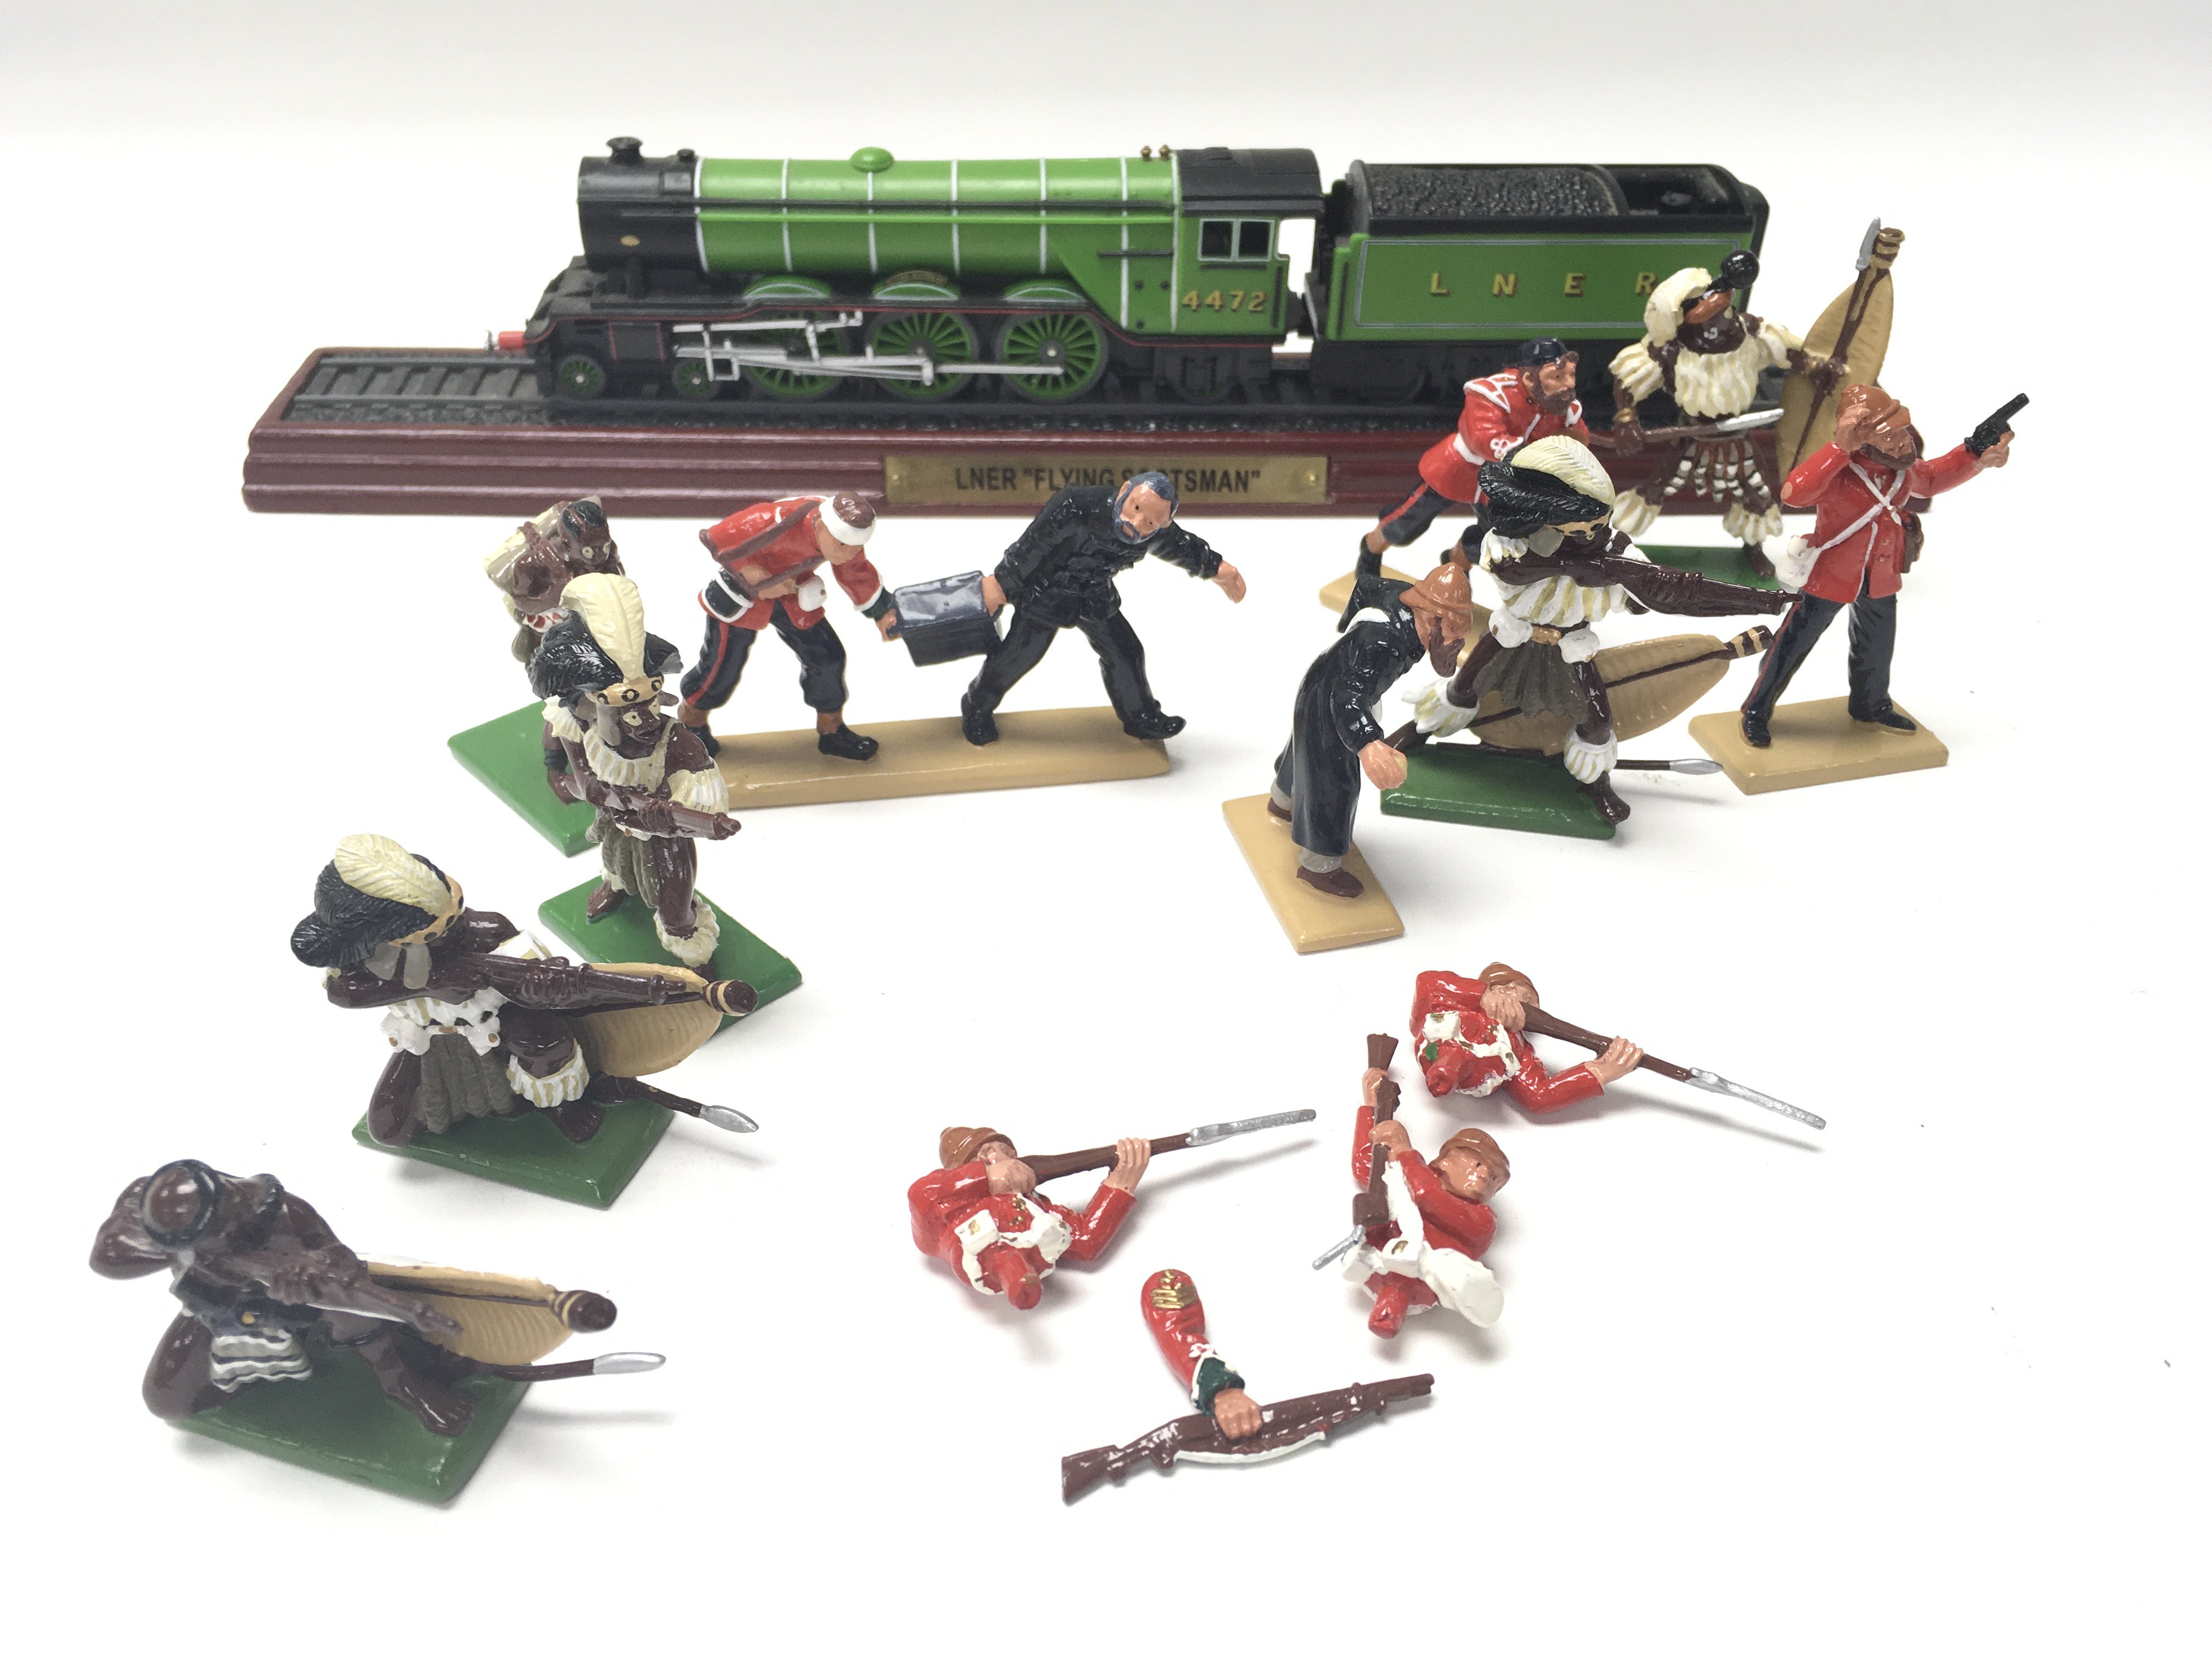 A collection of Britain’s soldiers and a model of